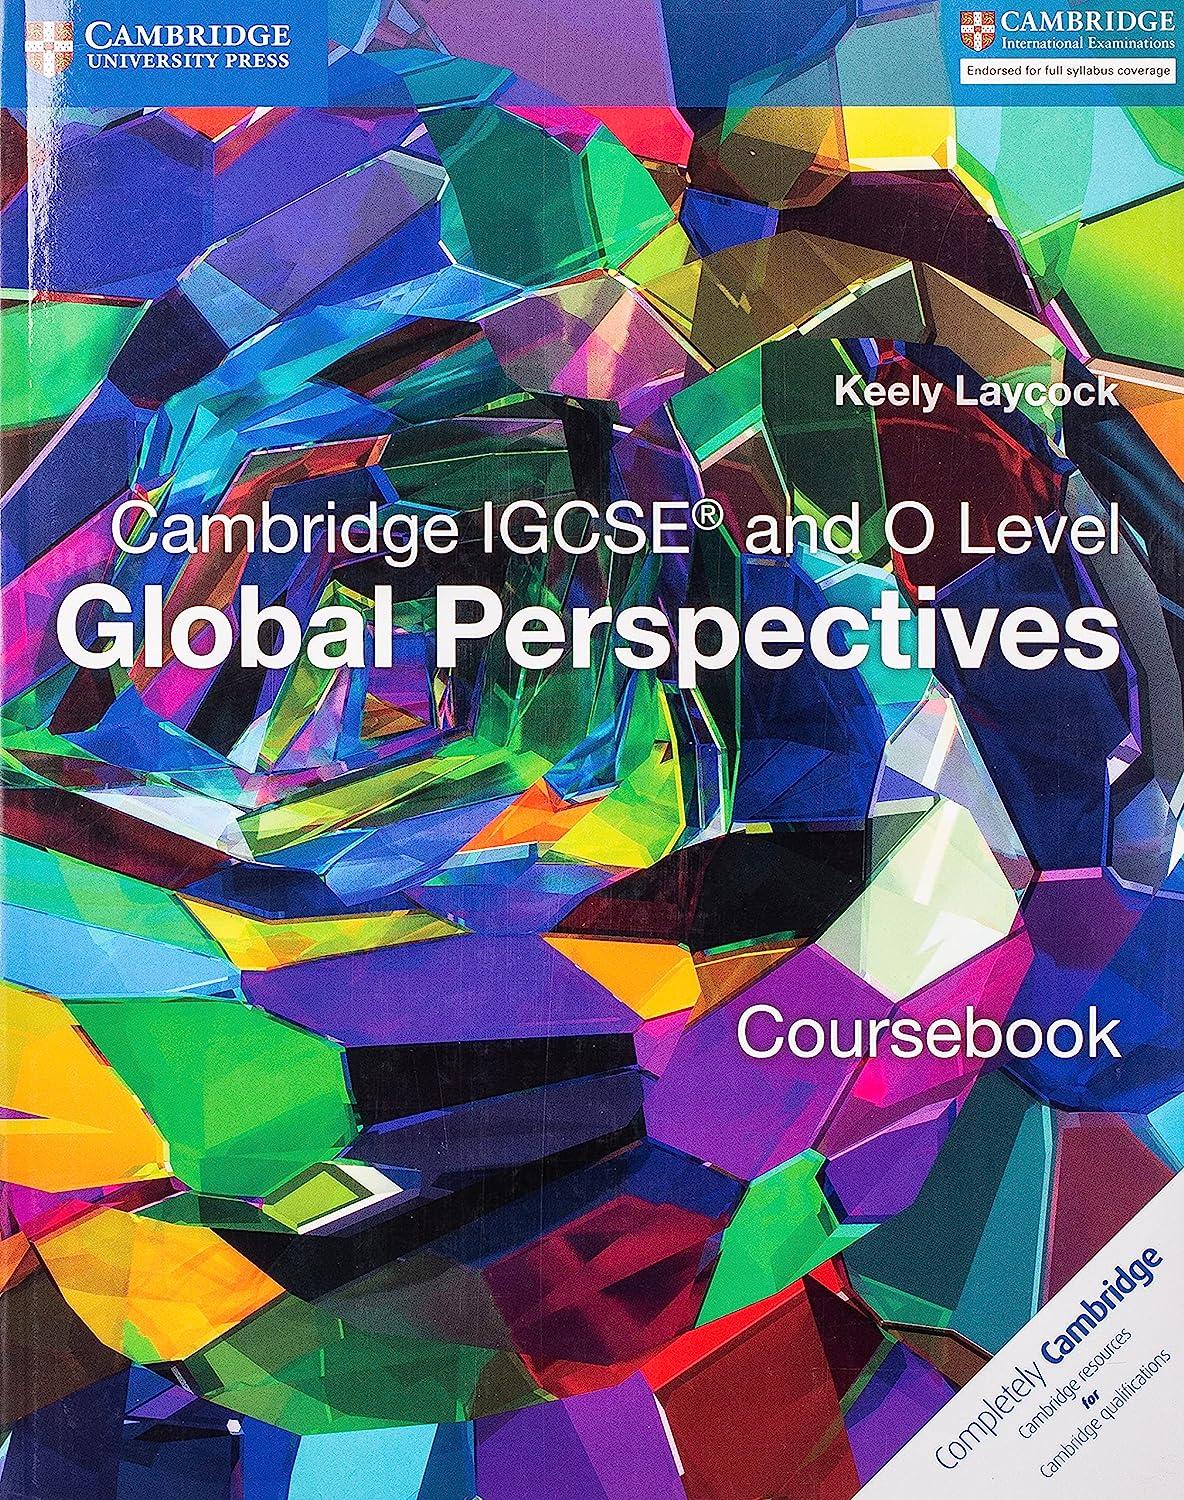 cambridge igcse and o level global perspectives coursebook 1st edition keely laycock 1316611108,